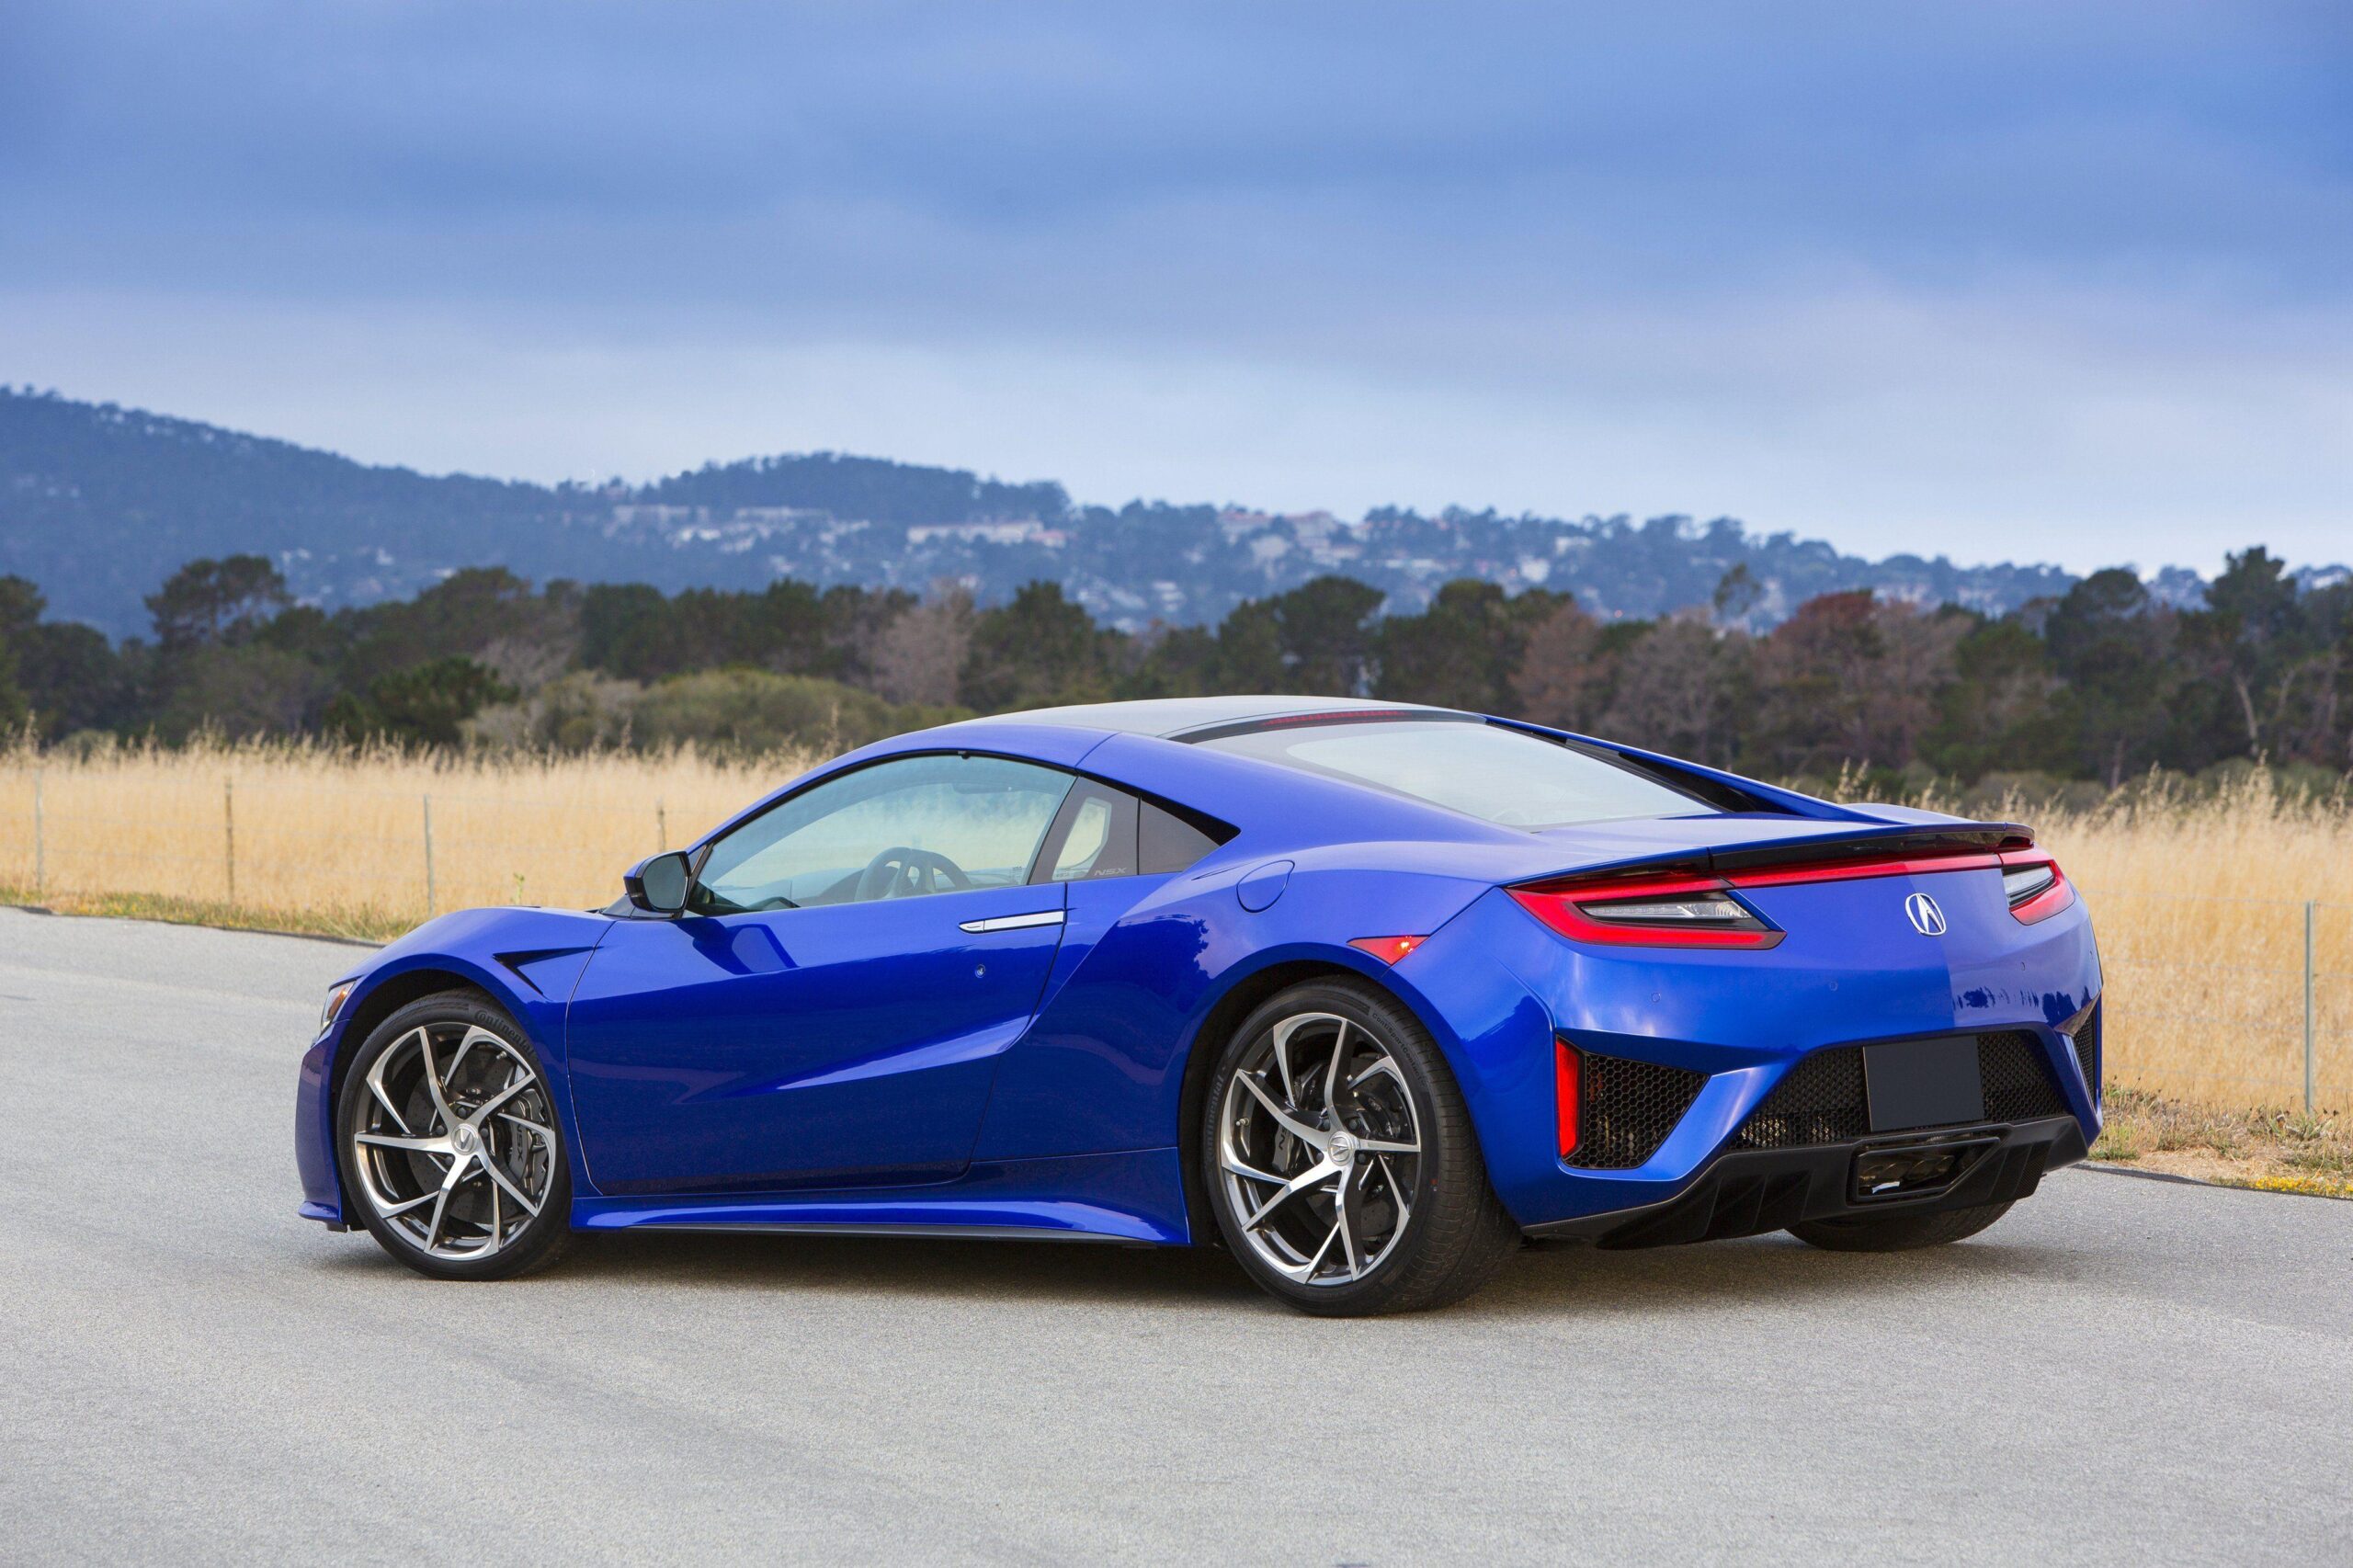 2017 Acura NSX Download Hd Wallpapers